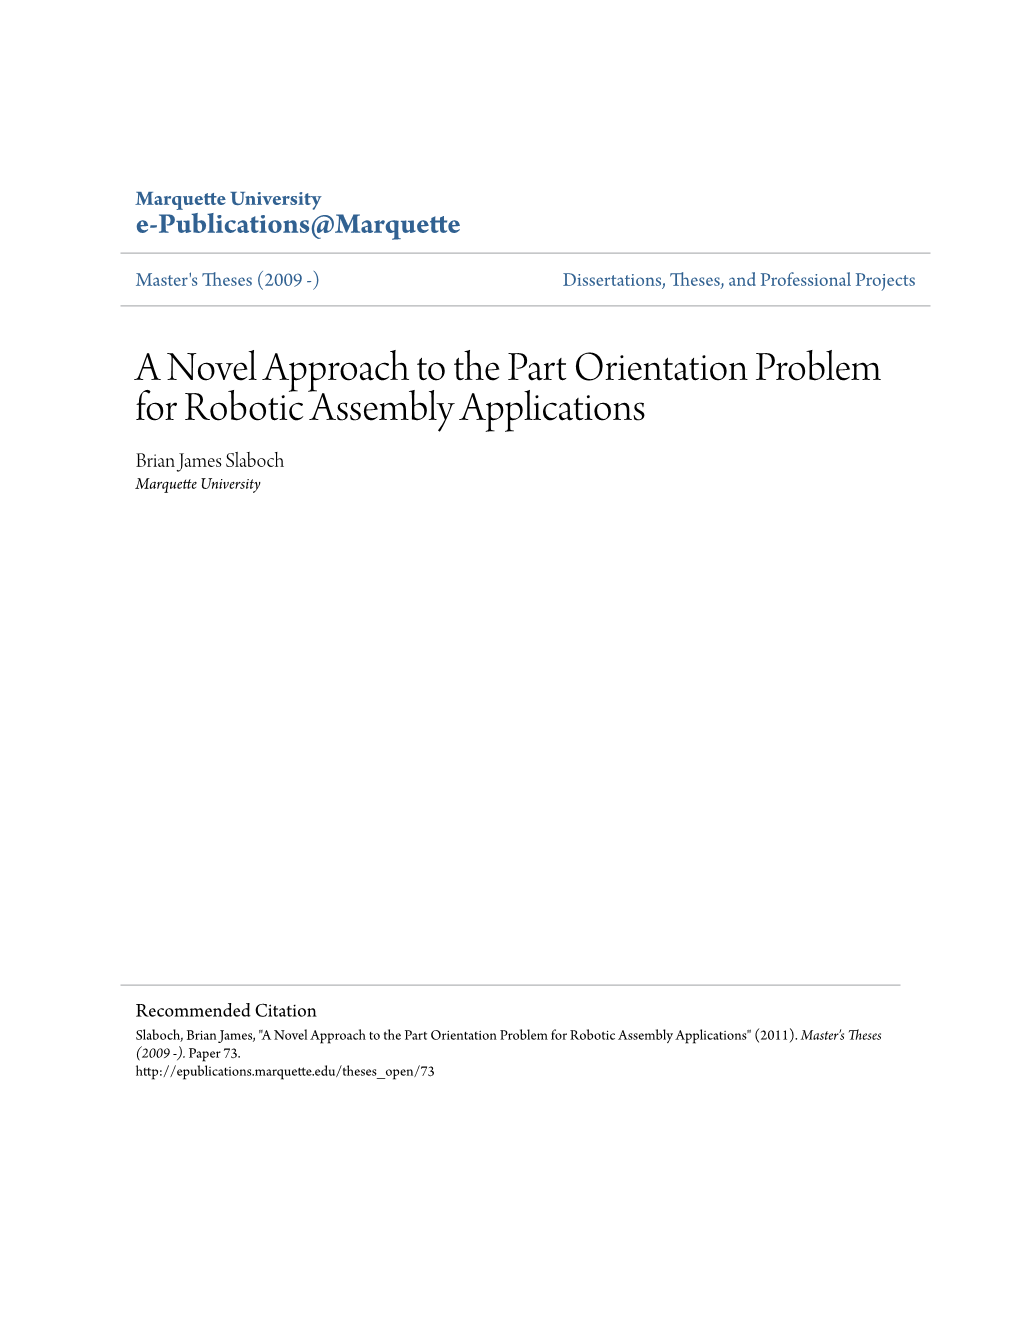 A Novel Approach to the Part Orientation Problem for Robotic Assembly Applications Brian James Slaboch Marquette University